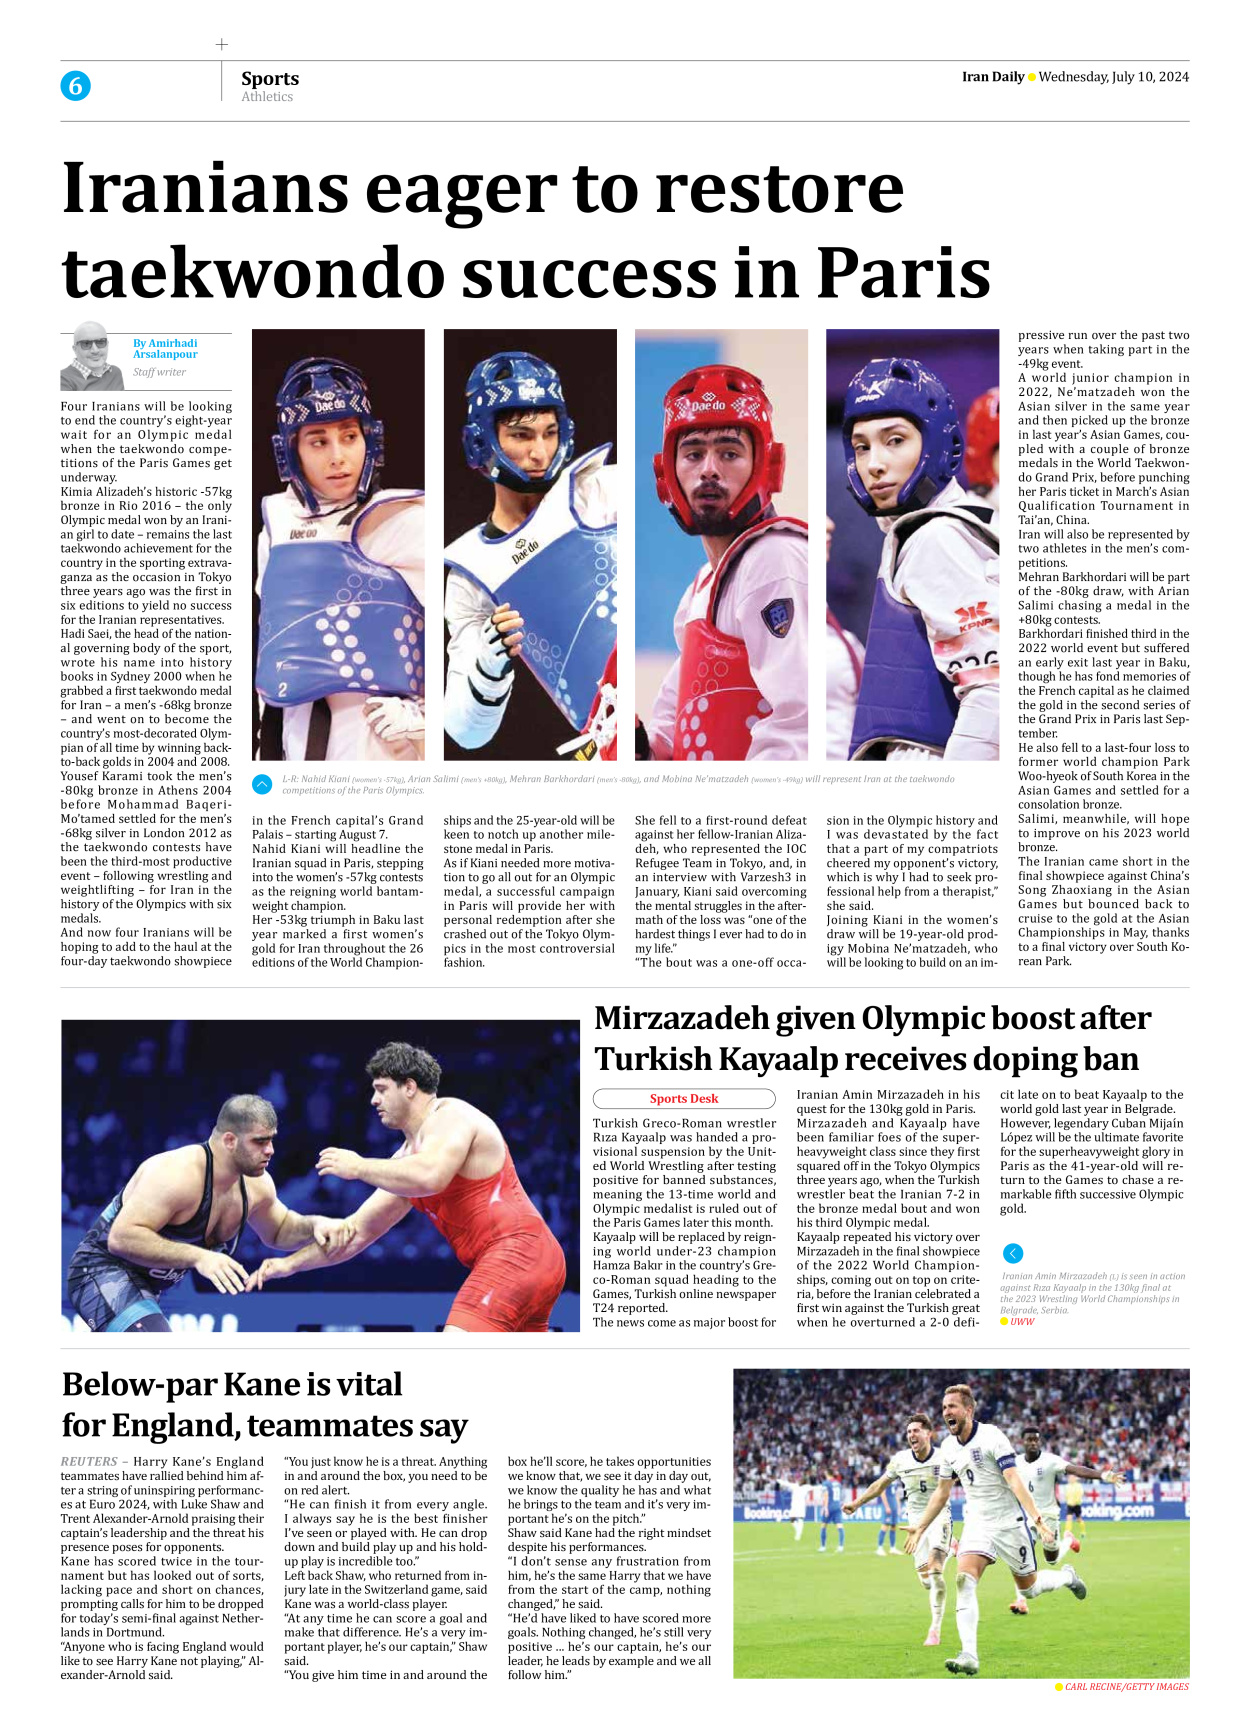 Iran Daily - Number Seven Thousand Six Hundred and One - 10 July 2024 - Page 6